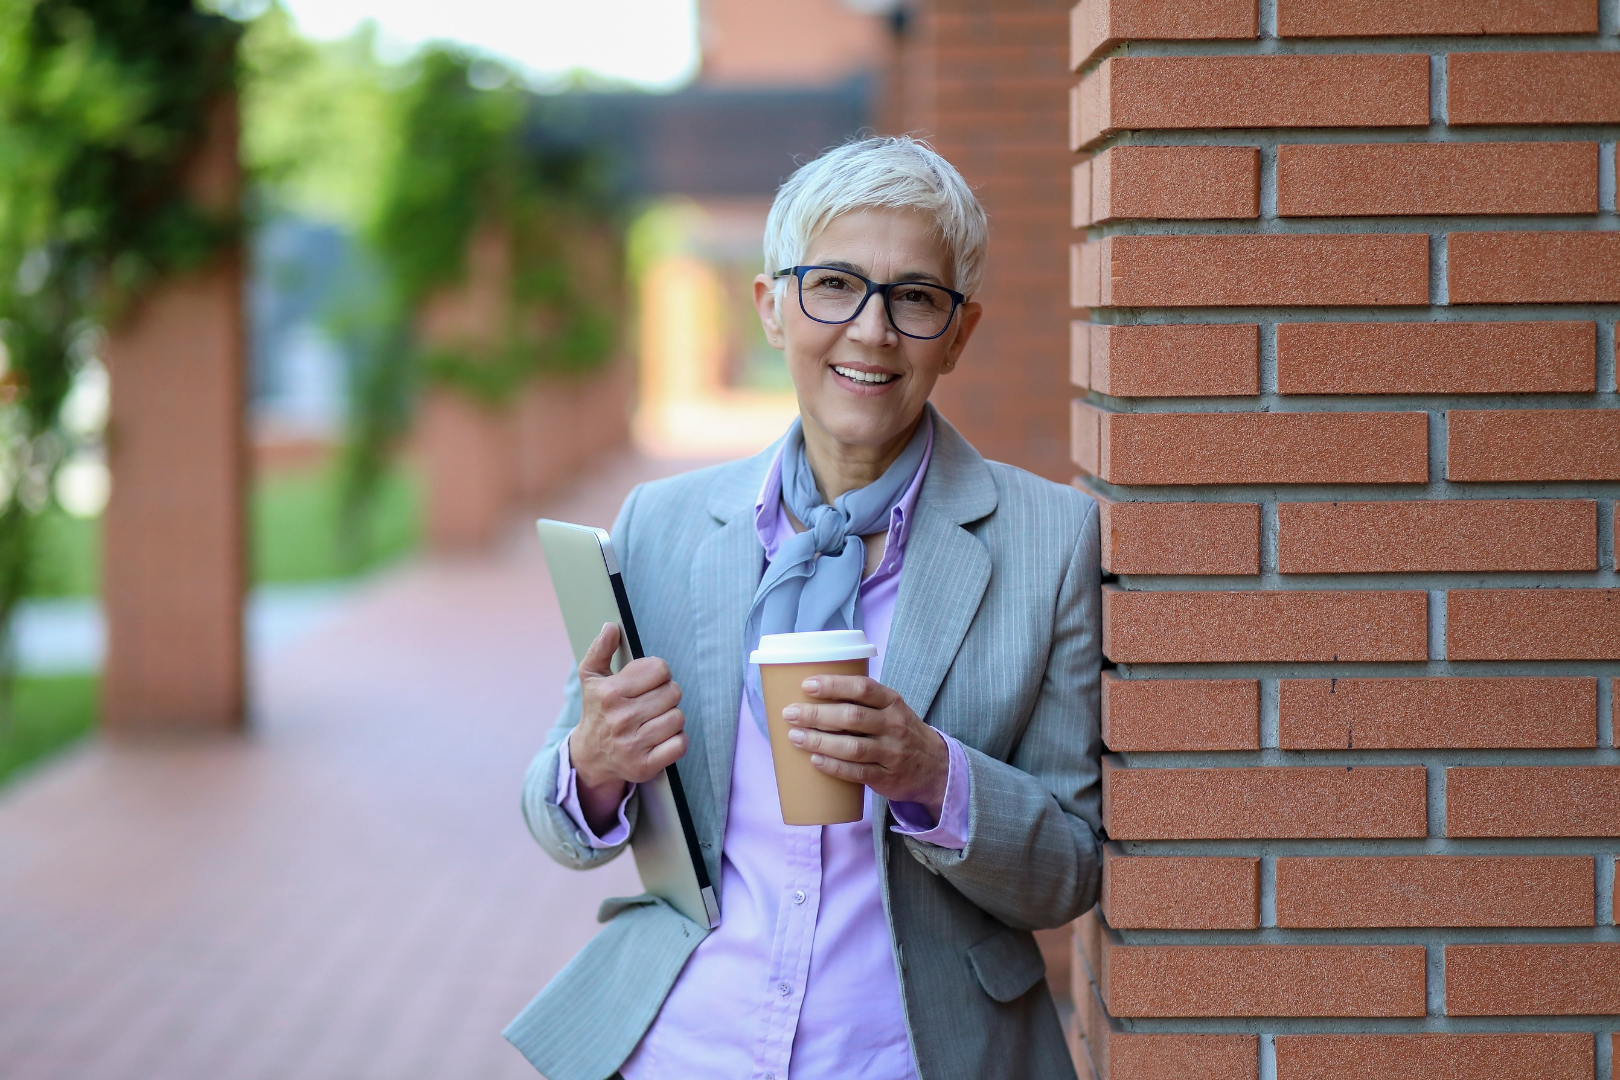 A woman with short grey hair and glasses, wearing a professional outfit is posing beside a red brick wall. She is holding a folder and a takeaway coffee and smiling warmly.